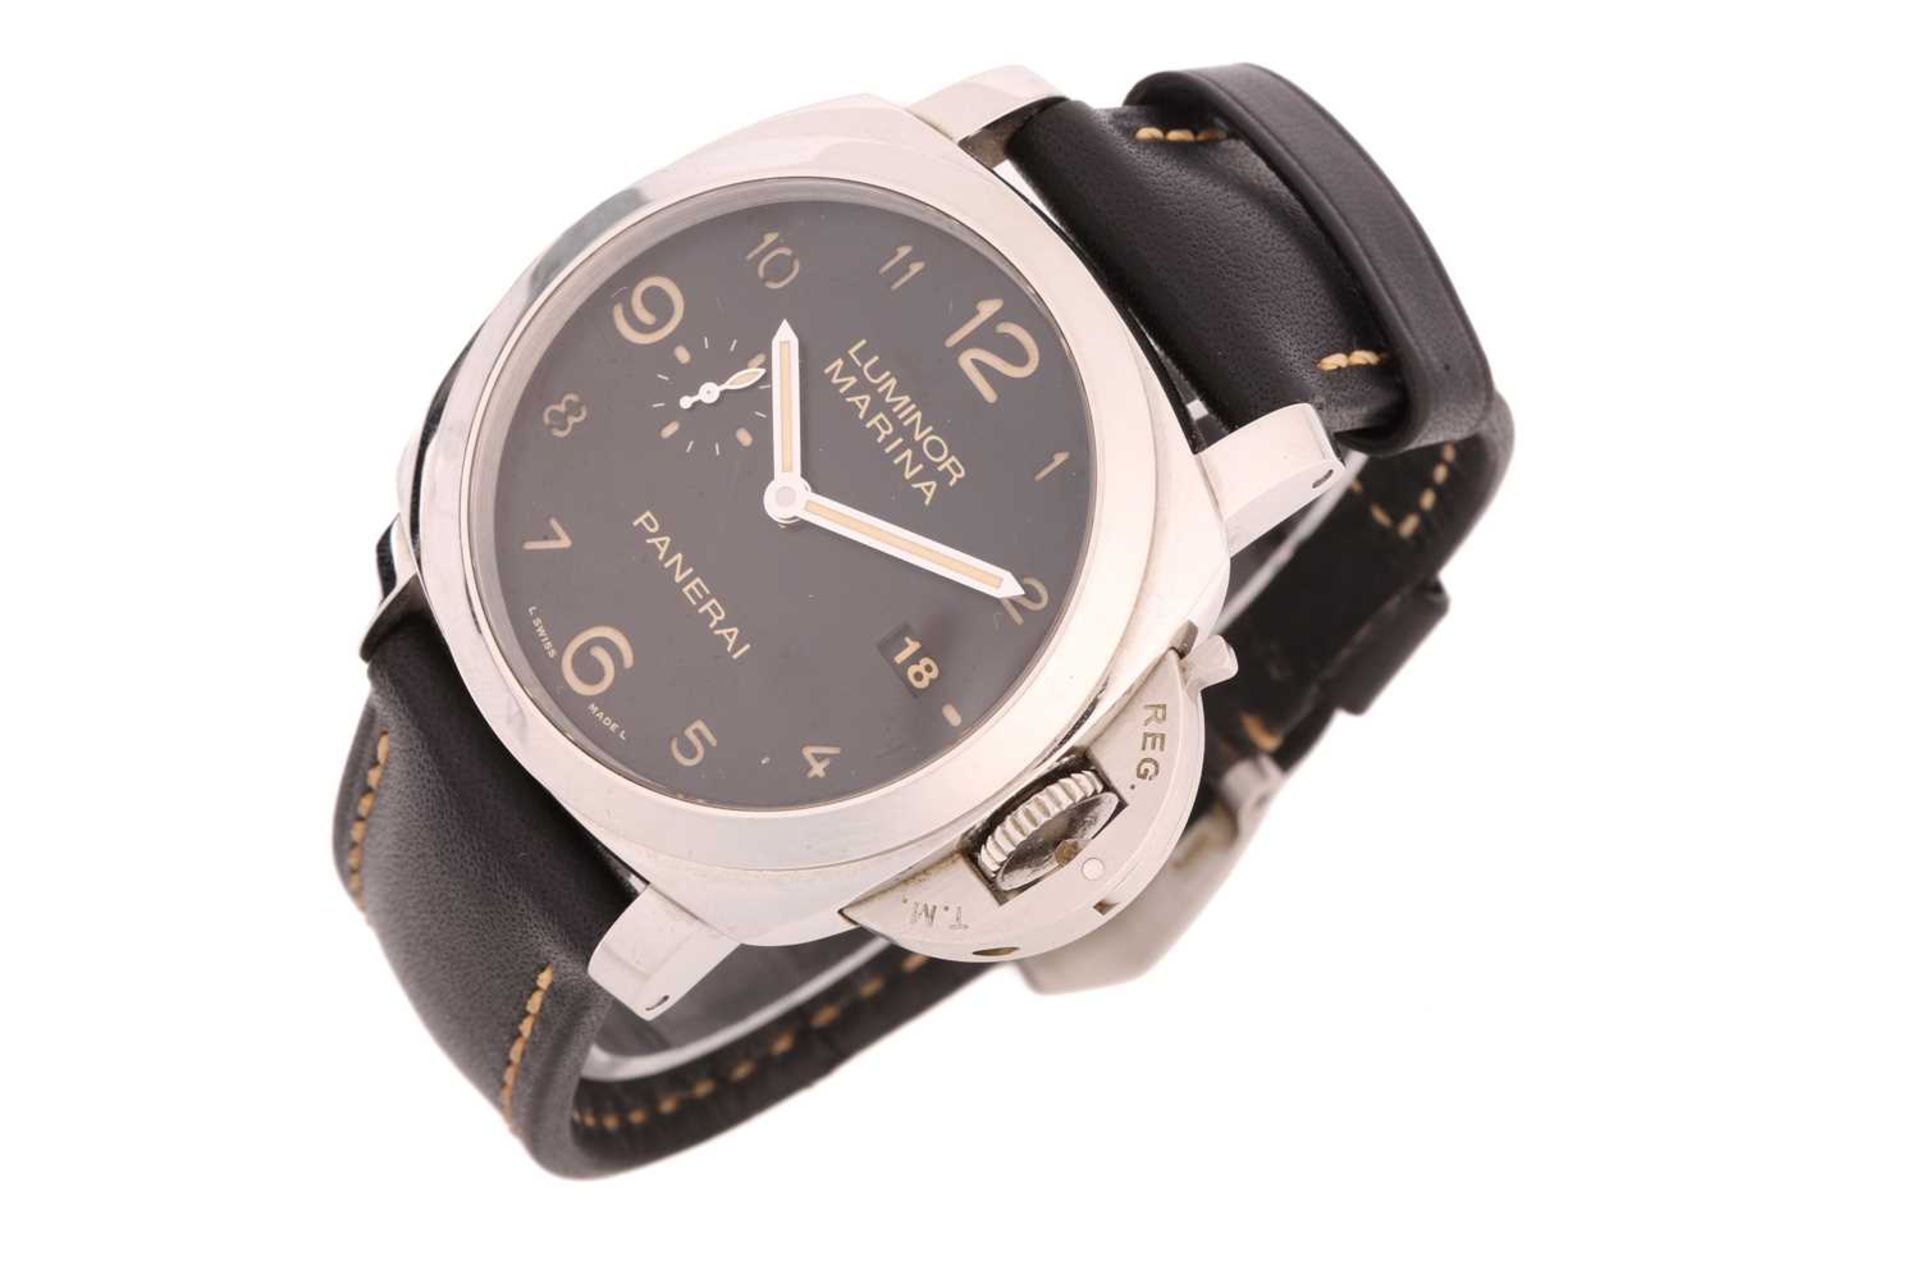 A Panerai Luminor Marina Ref: PAM00359, featuring a Swiss-made automatic movement in a steel case - Image 3 of 25